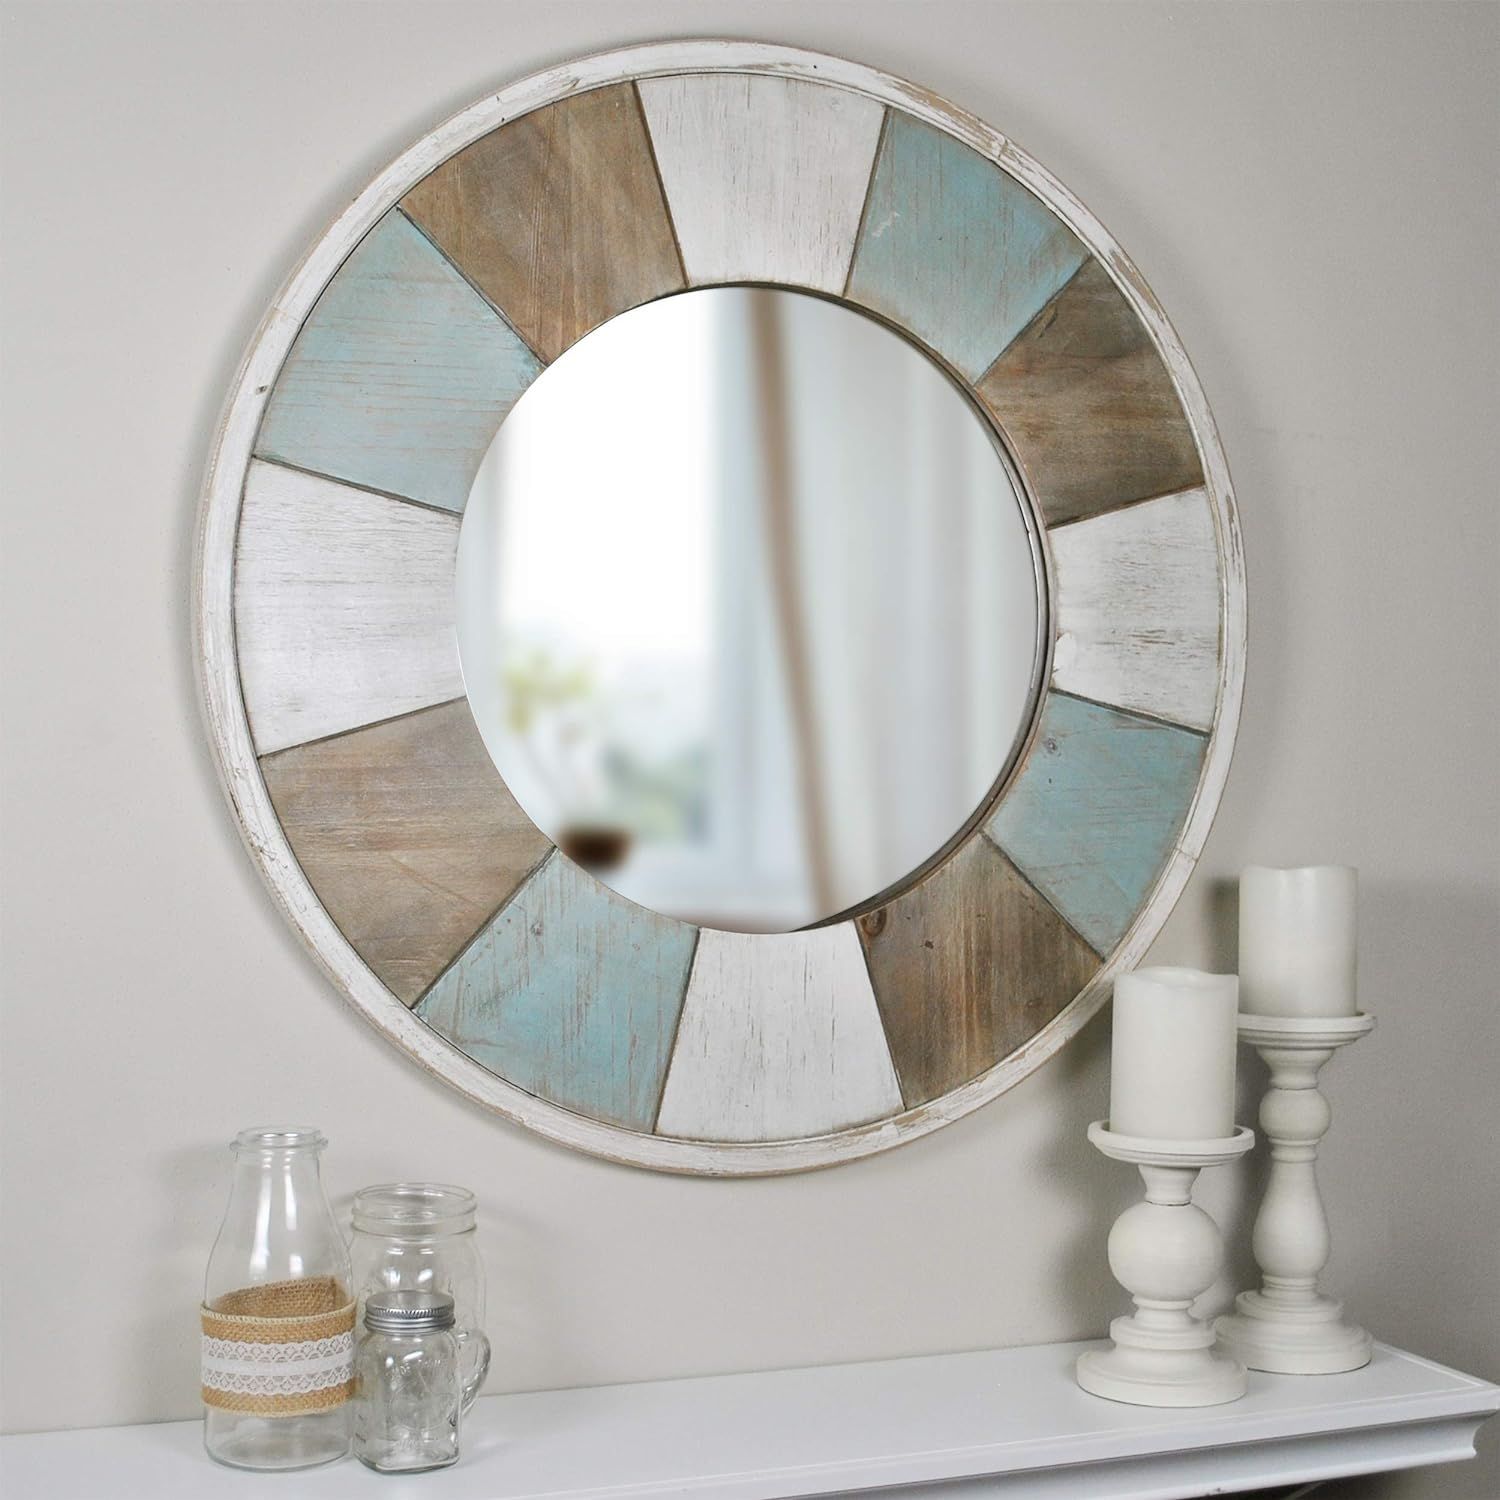 FirsTime & Co. Cottage Timbers Accent Wall Mirror, 27", Aged Teal/Shabby White/Natural Wood | Amazon (US)